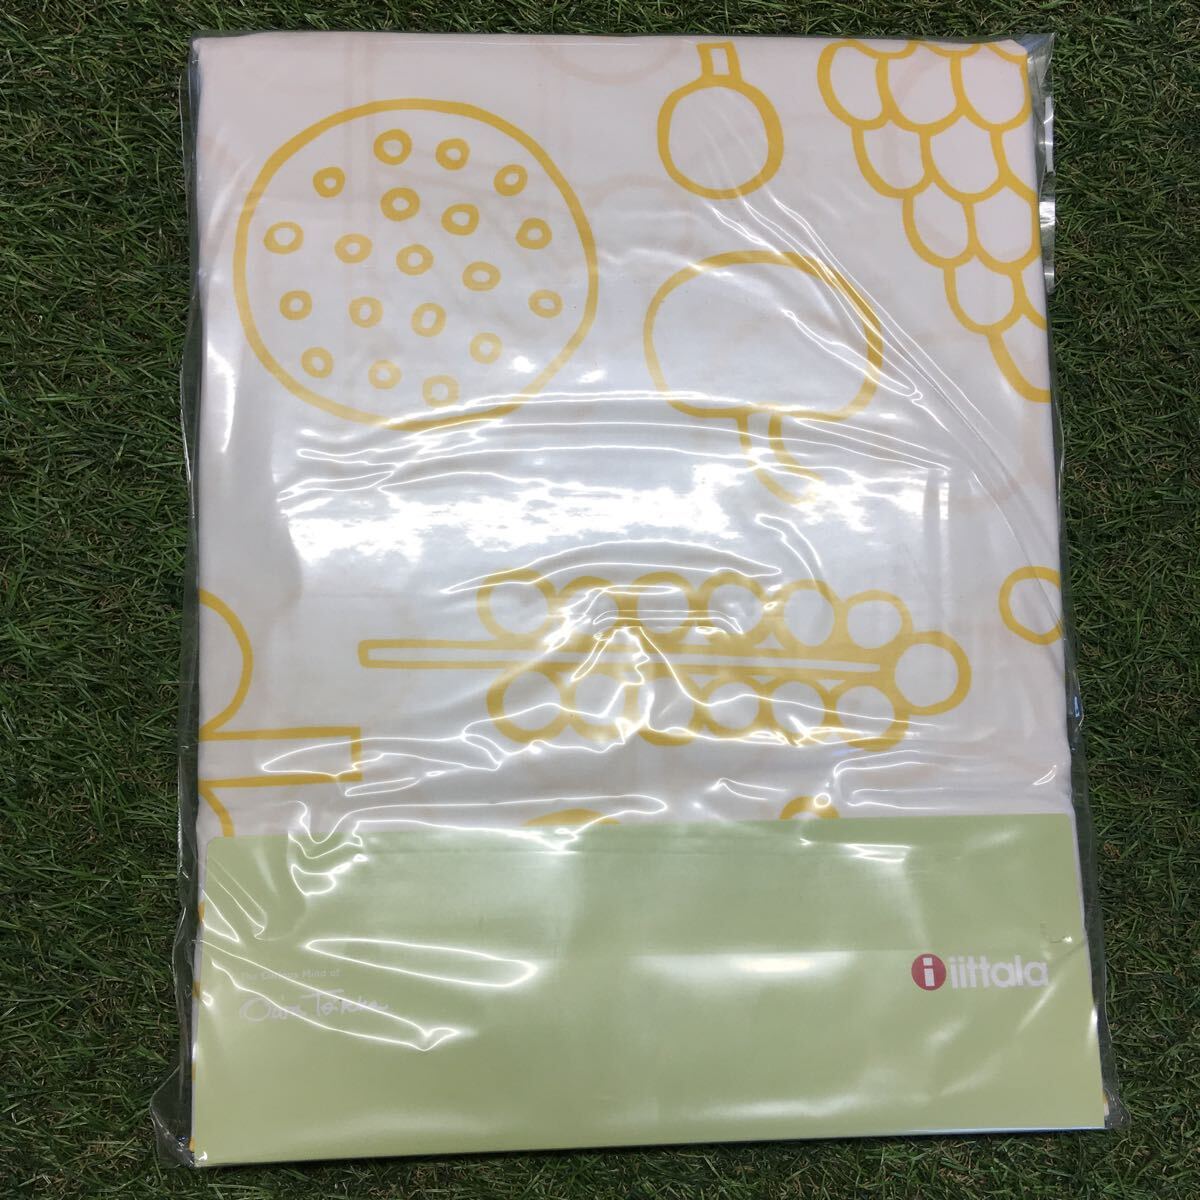 RX358-A61 iittala iittala bed cover OTC 367408 full ta150×210cm yellow color bed bedding cover double miscellaneous goods unused storage goods bed 